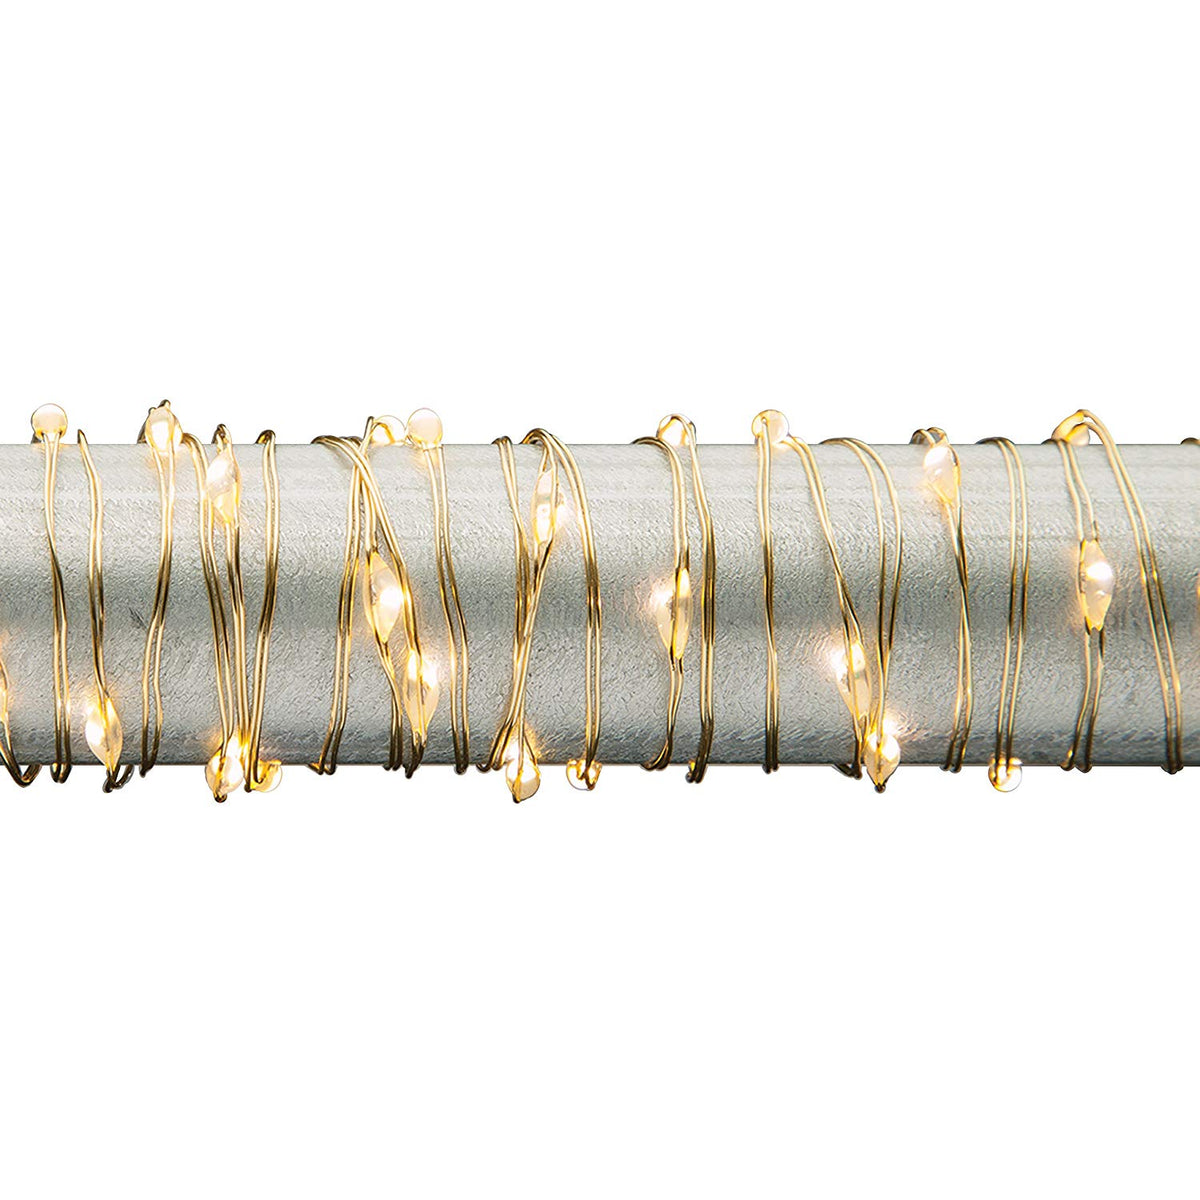 Everlasting Glow 93778 B/O Warm White Micro 62-LED String Light 11', Gold Wire